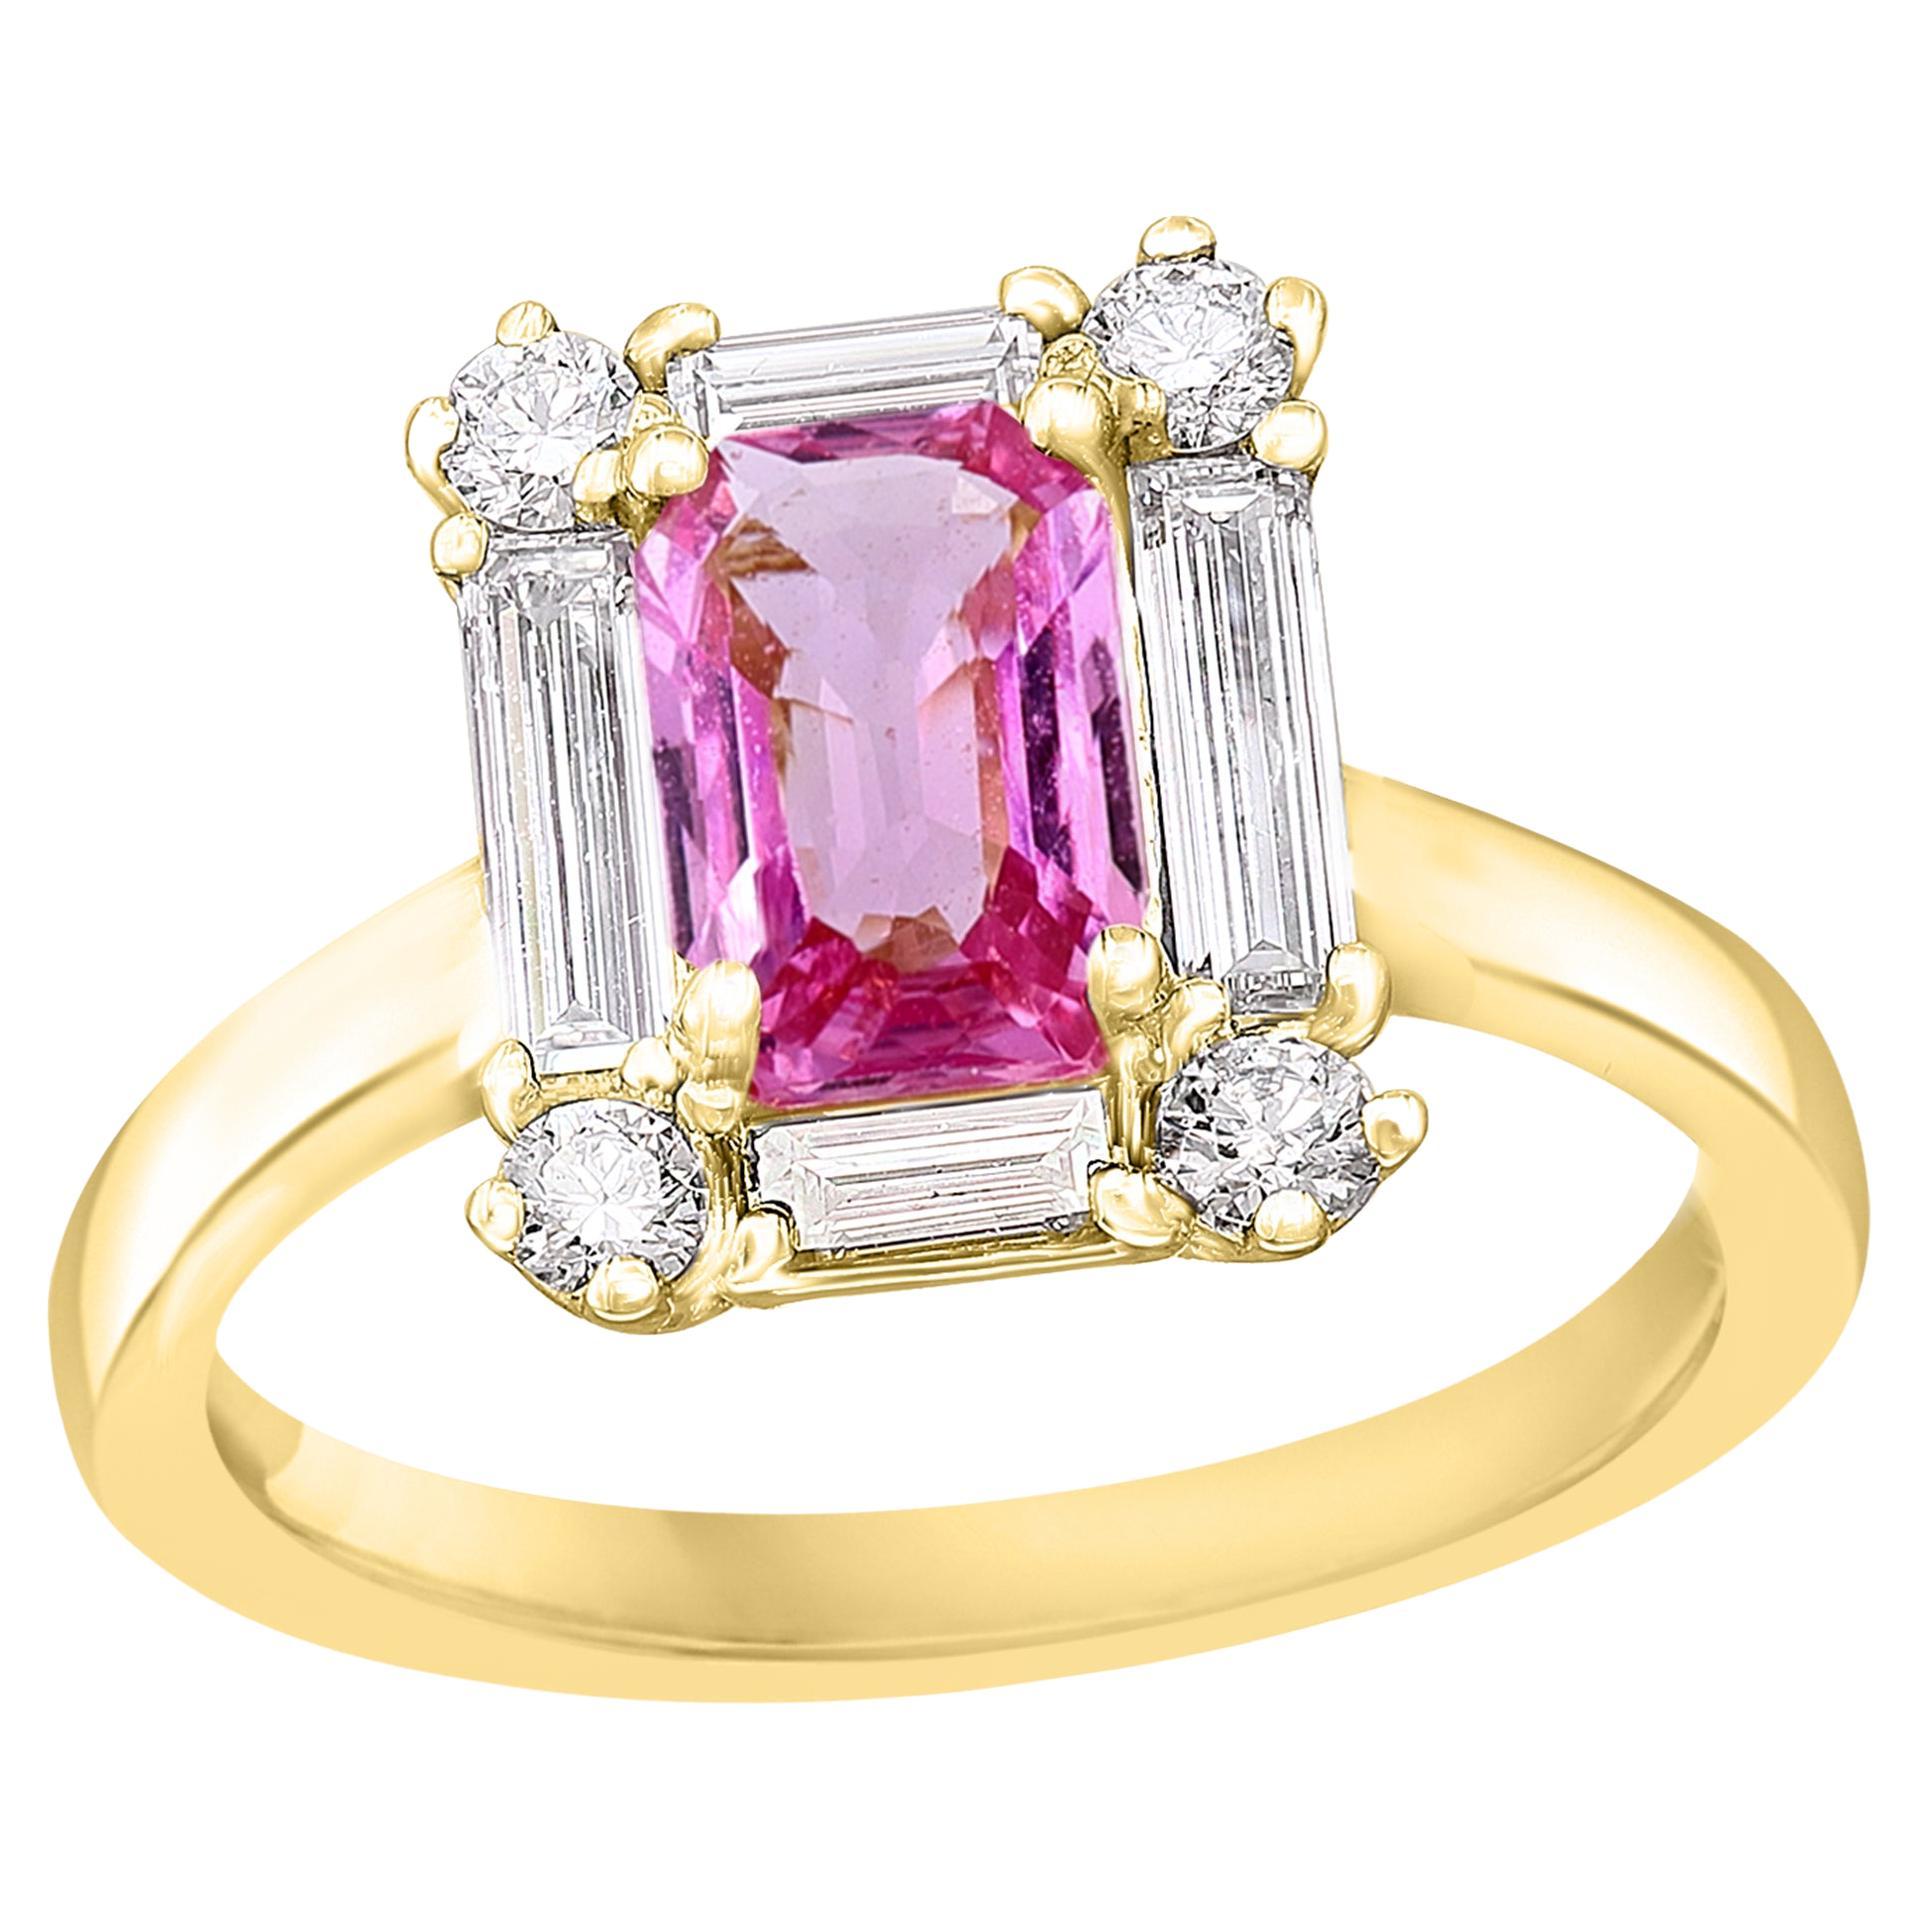 0.55 Carat Emerald Cut Pink Sapphire and Diamond Ring 14K Yellow Gold For Sale